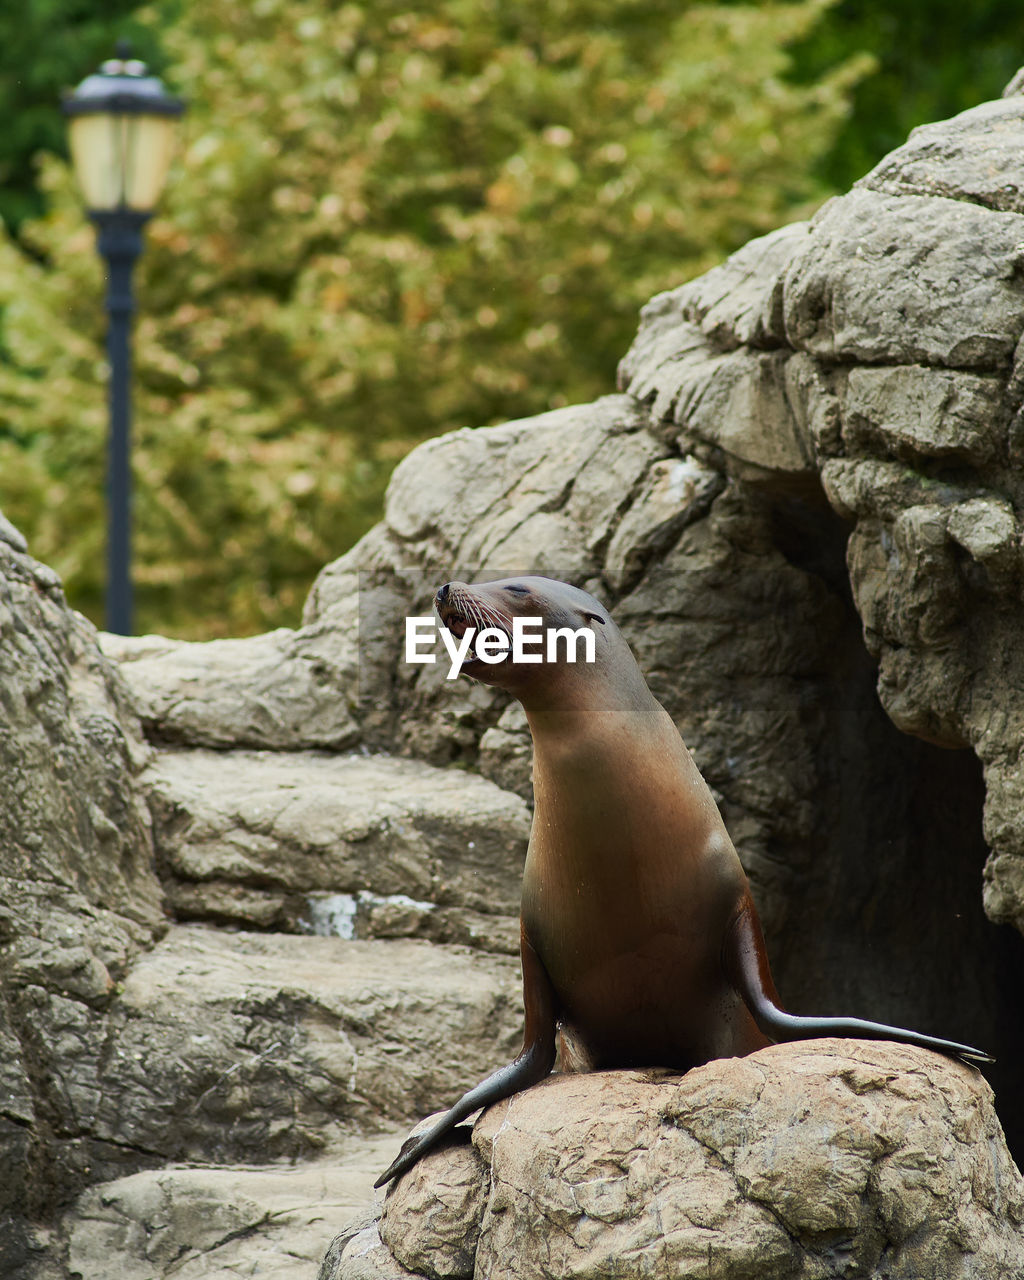 A seal is calling out while posing at its rock structure in the brooklyn zoo